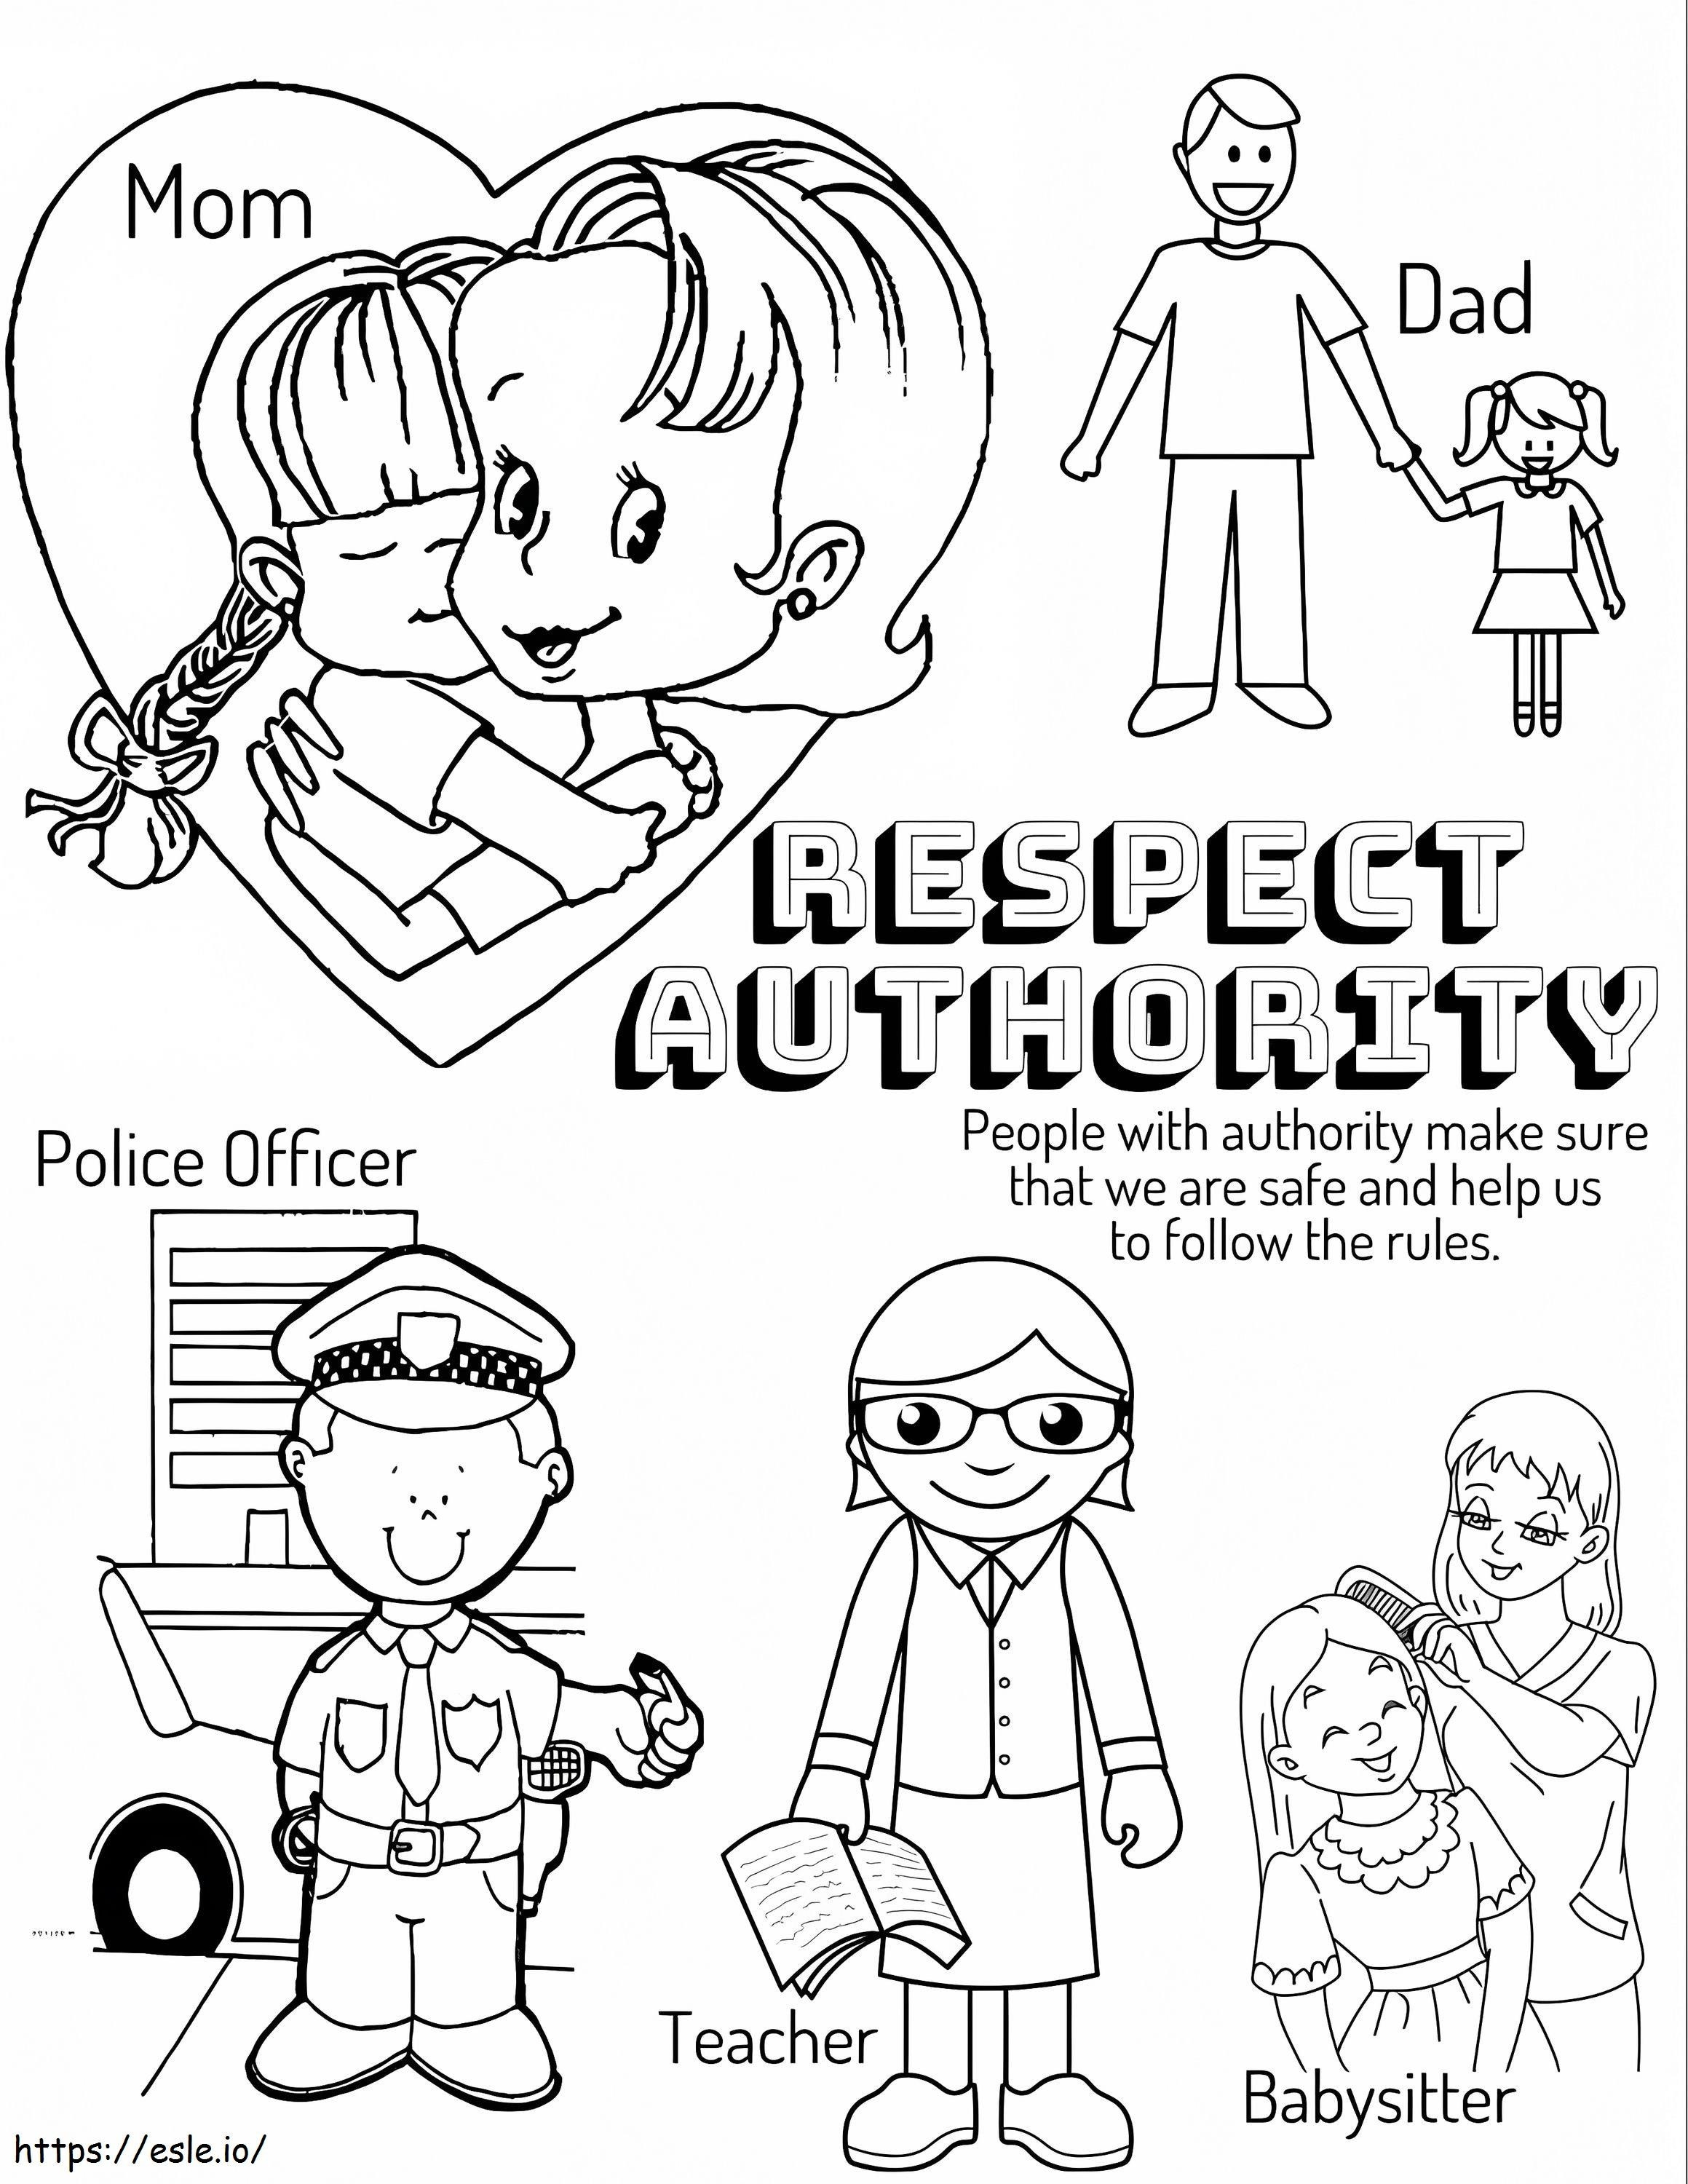 Respect Authority coloring page